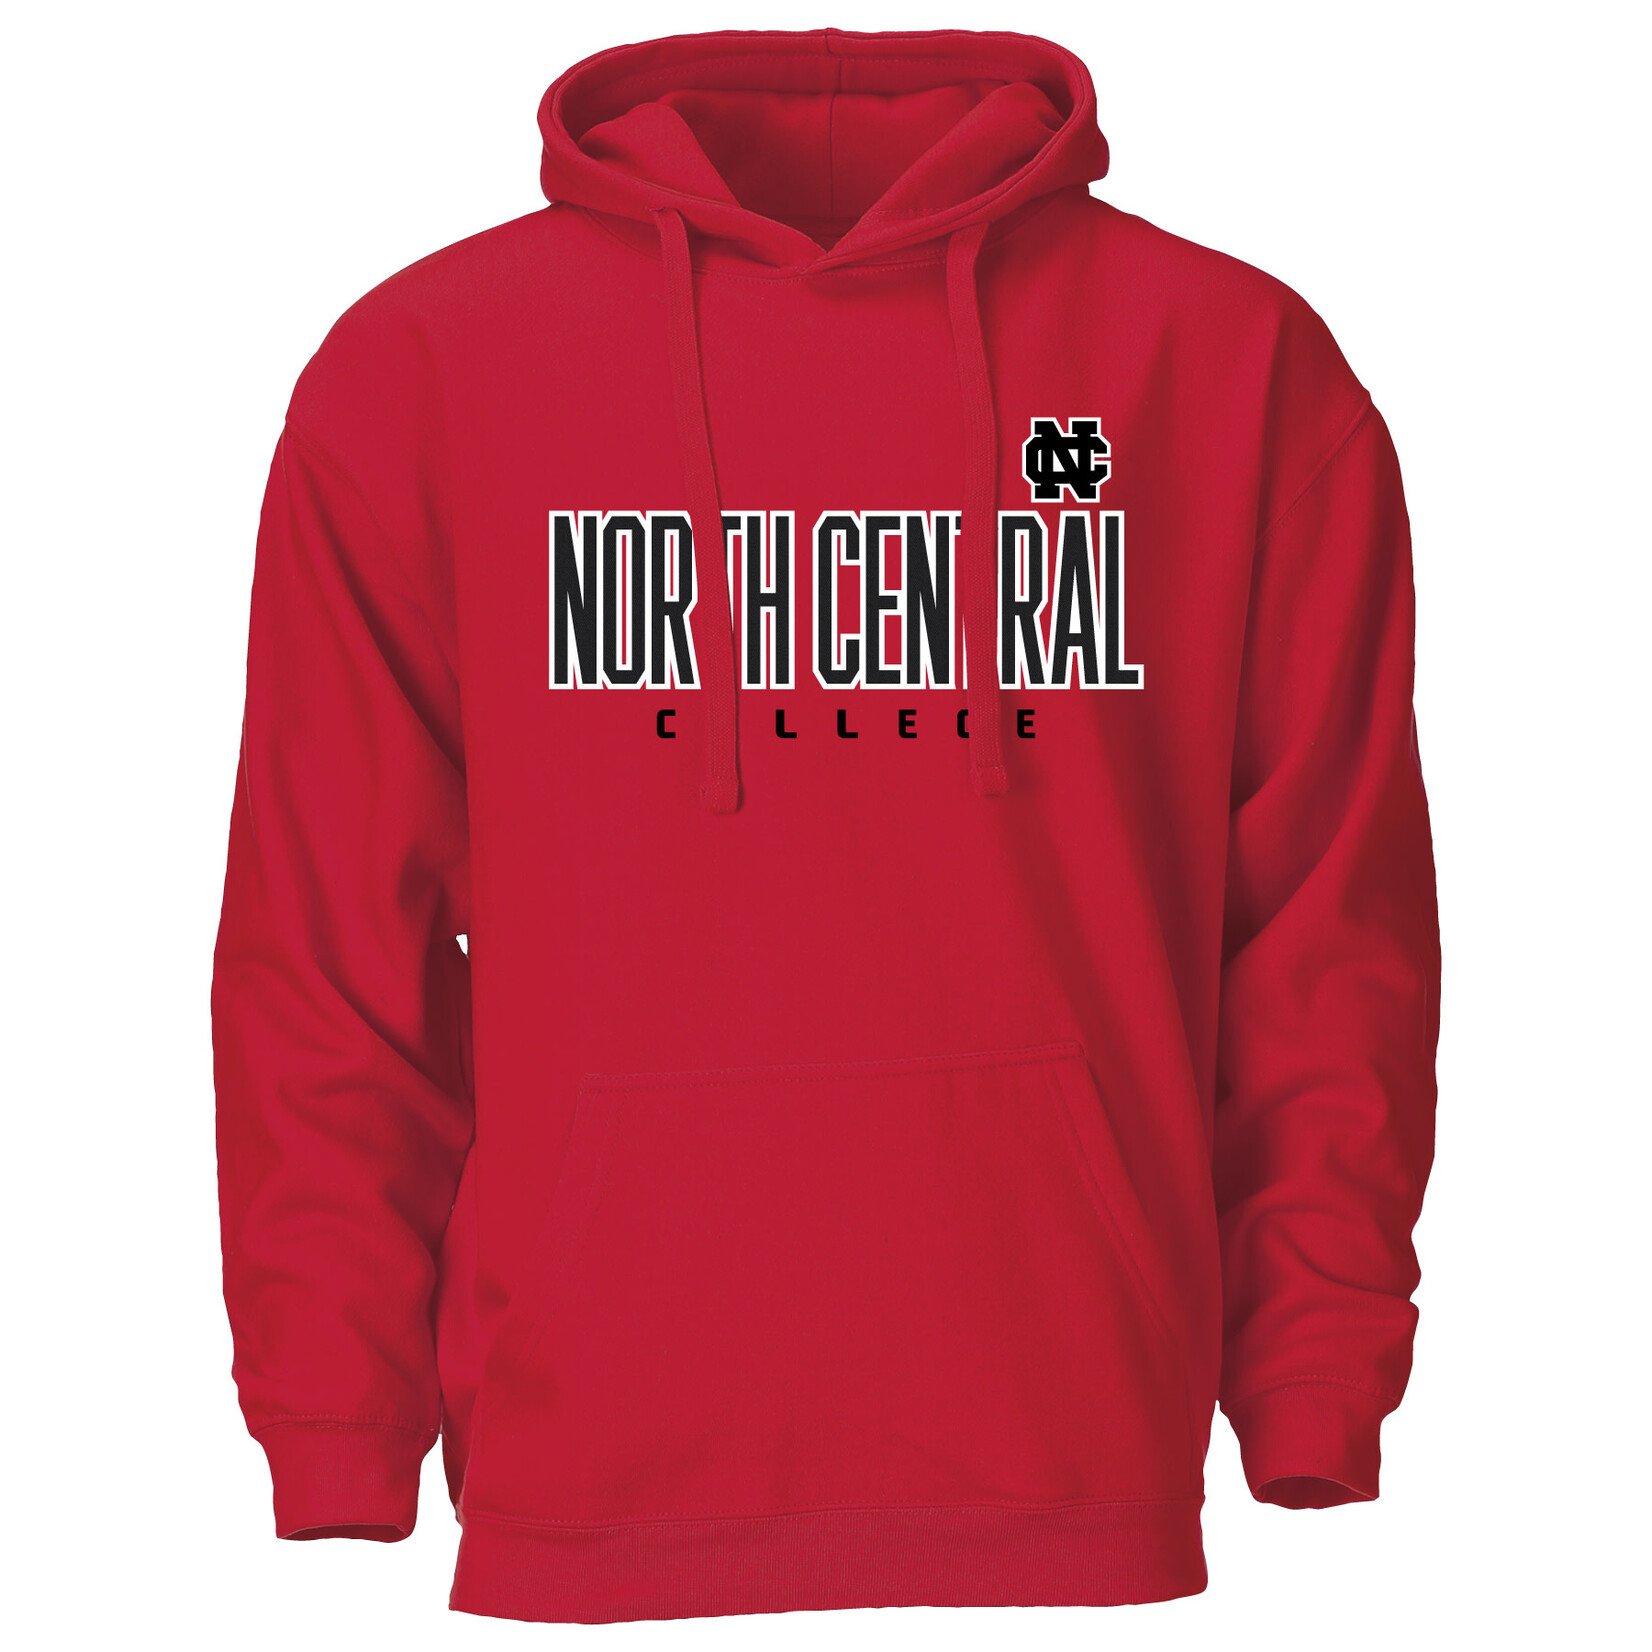 Ouray Sportswear North Central College F23 Benchmark Hoodie